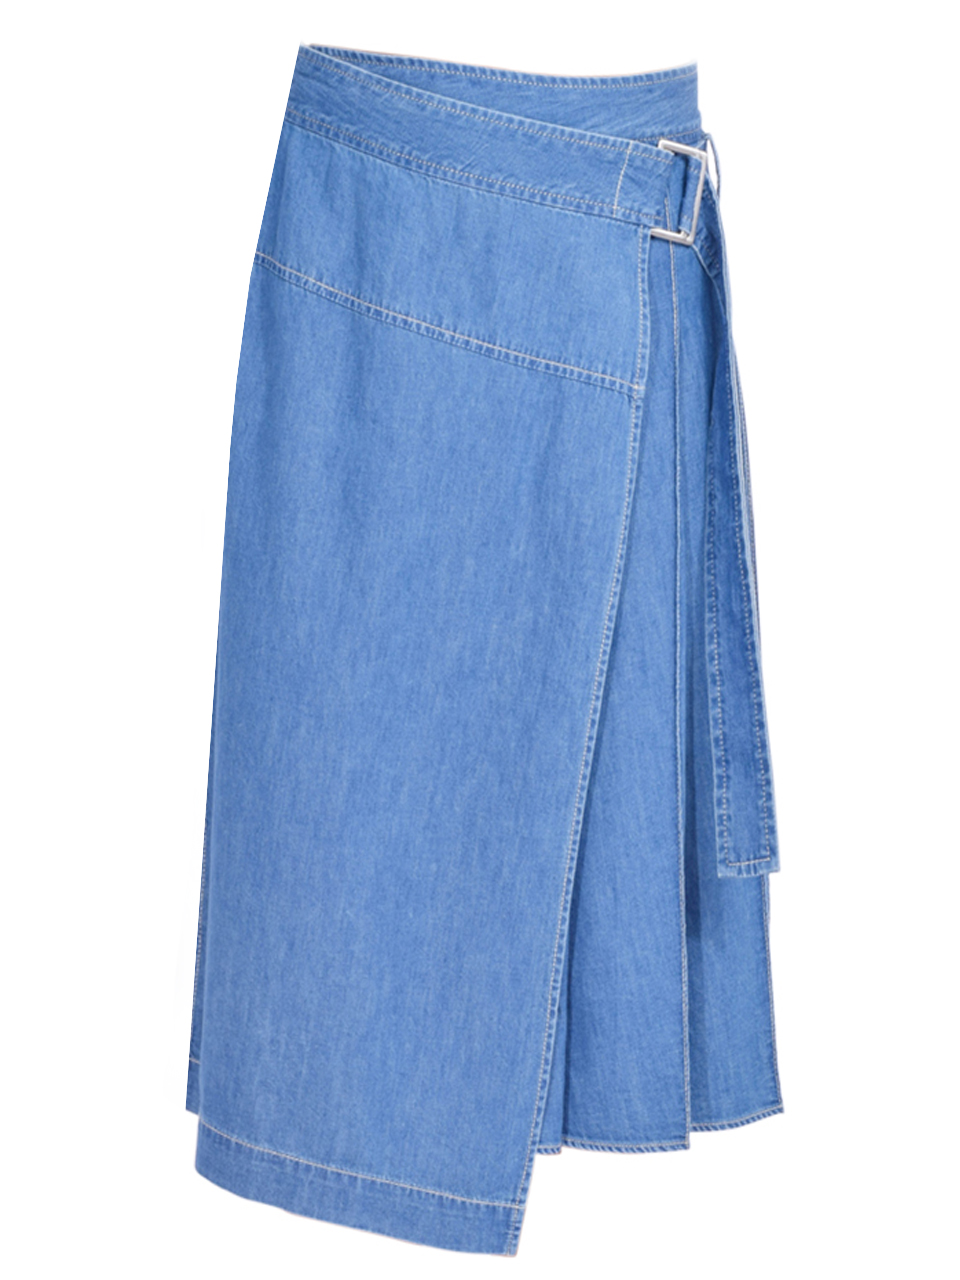 3.1 Phillip Lim Chambray Pleated Wrap Skirt in Indigo Product Shot 